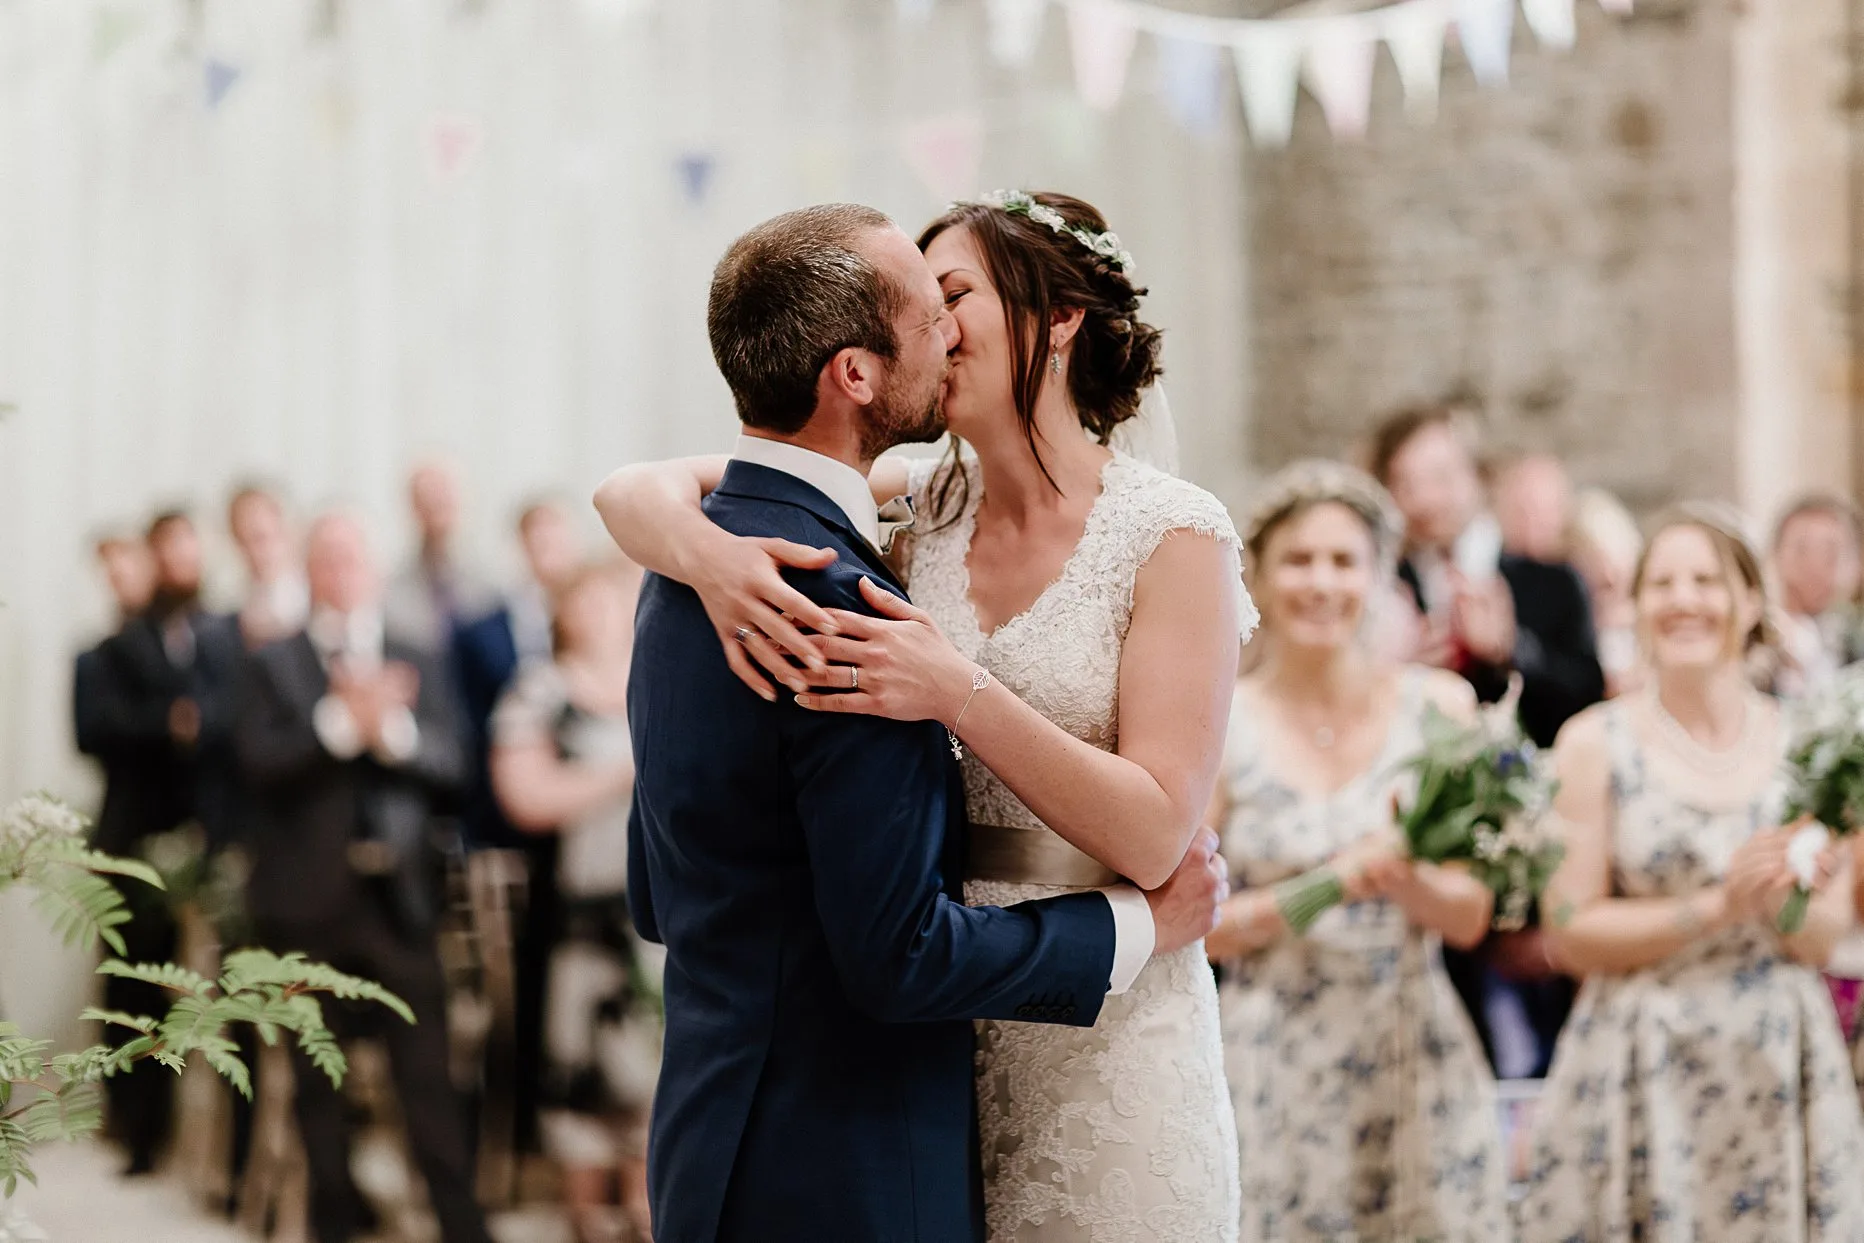 Bride and groom share their first kiss as husband and wife. Guests smiling in the background. The wedding ceremony is in an old barn in the Lake District.